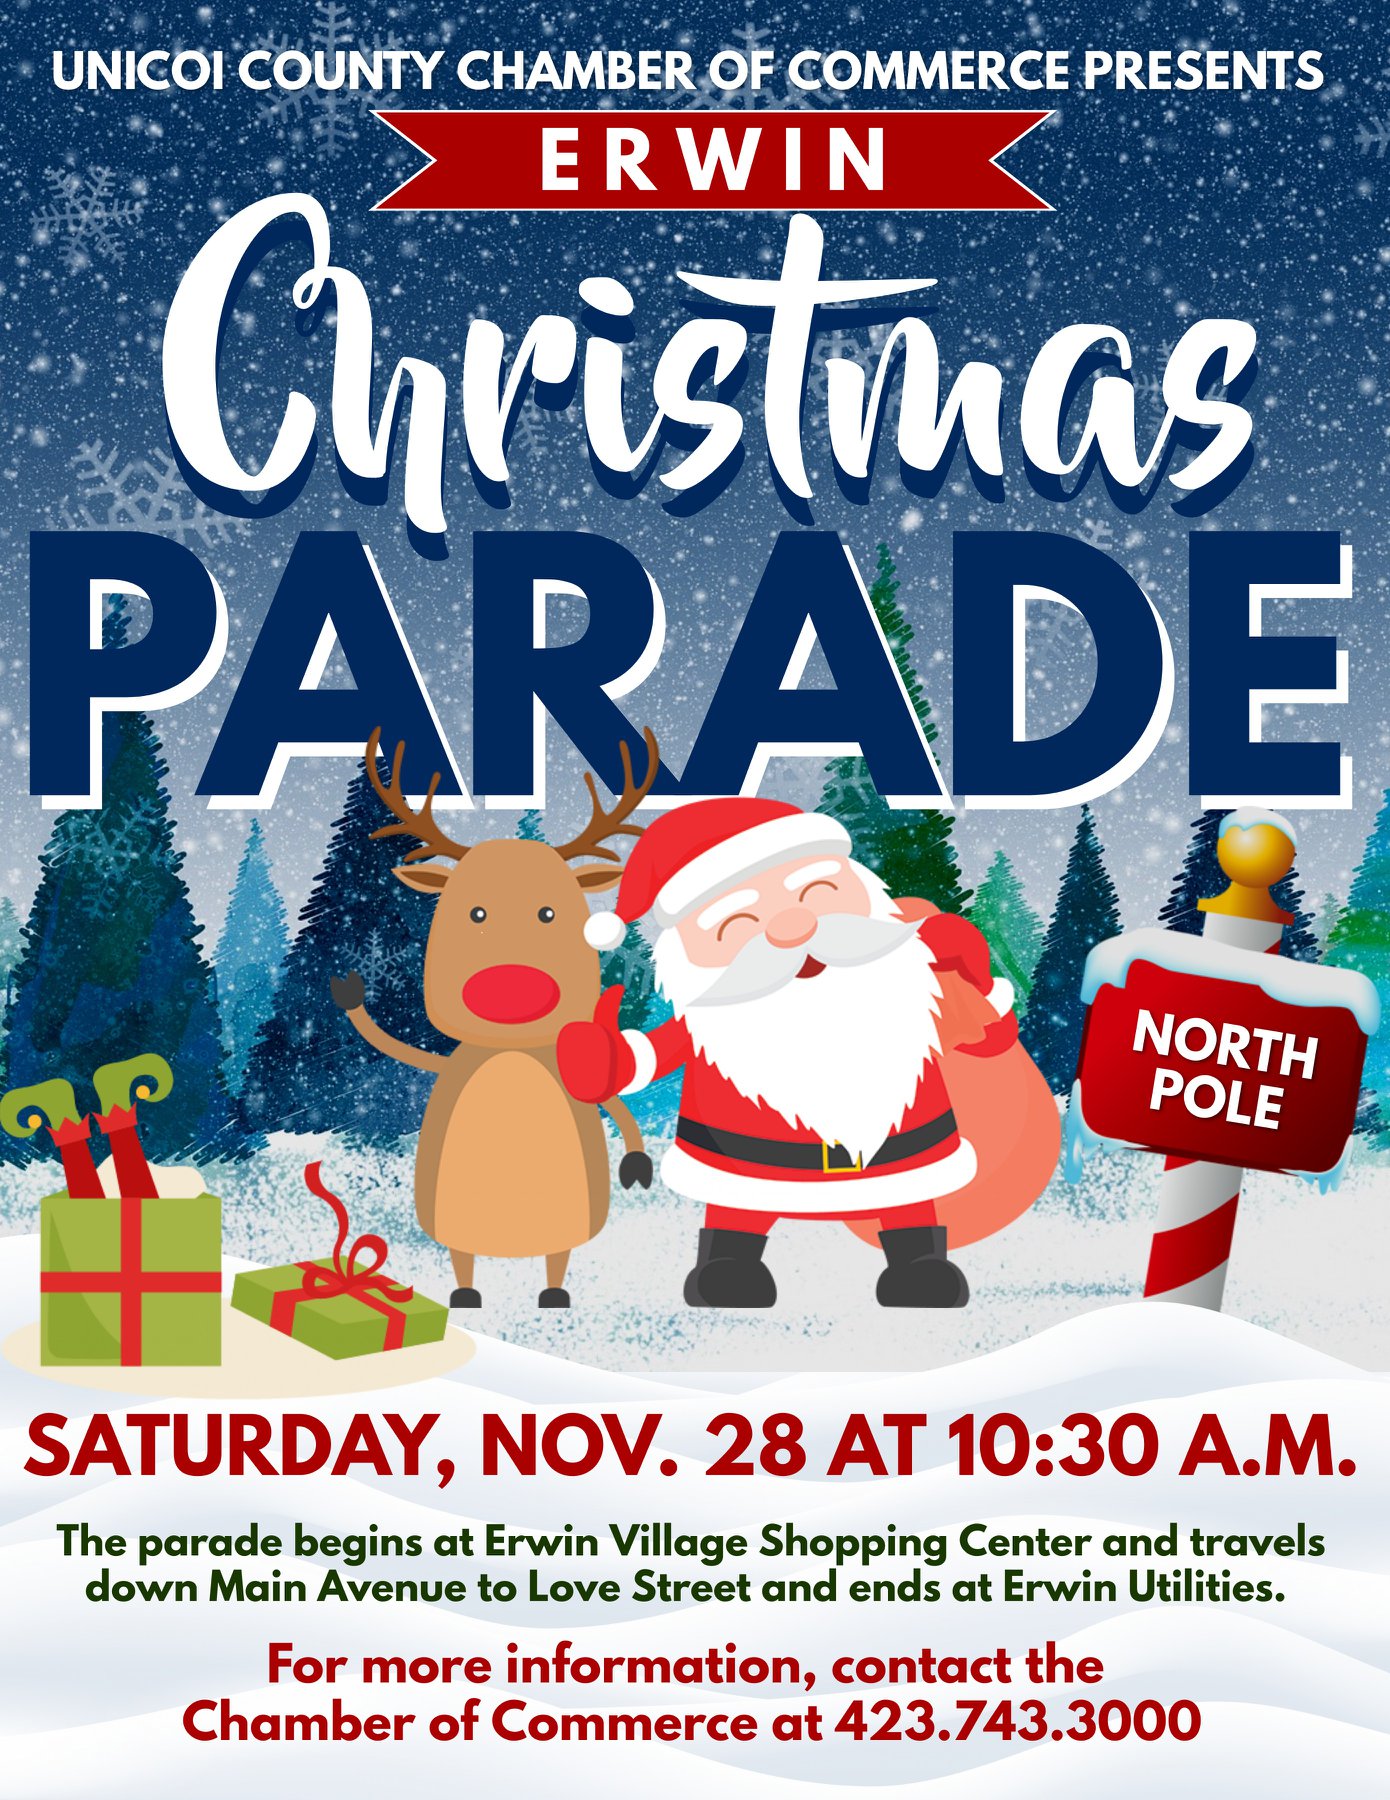 Erwin Christmas Parade canceled because of rising COVID19 cases 96.9